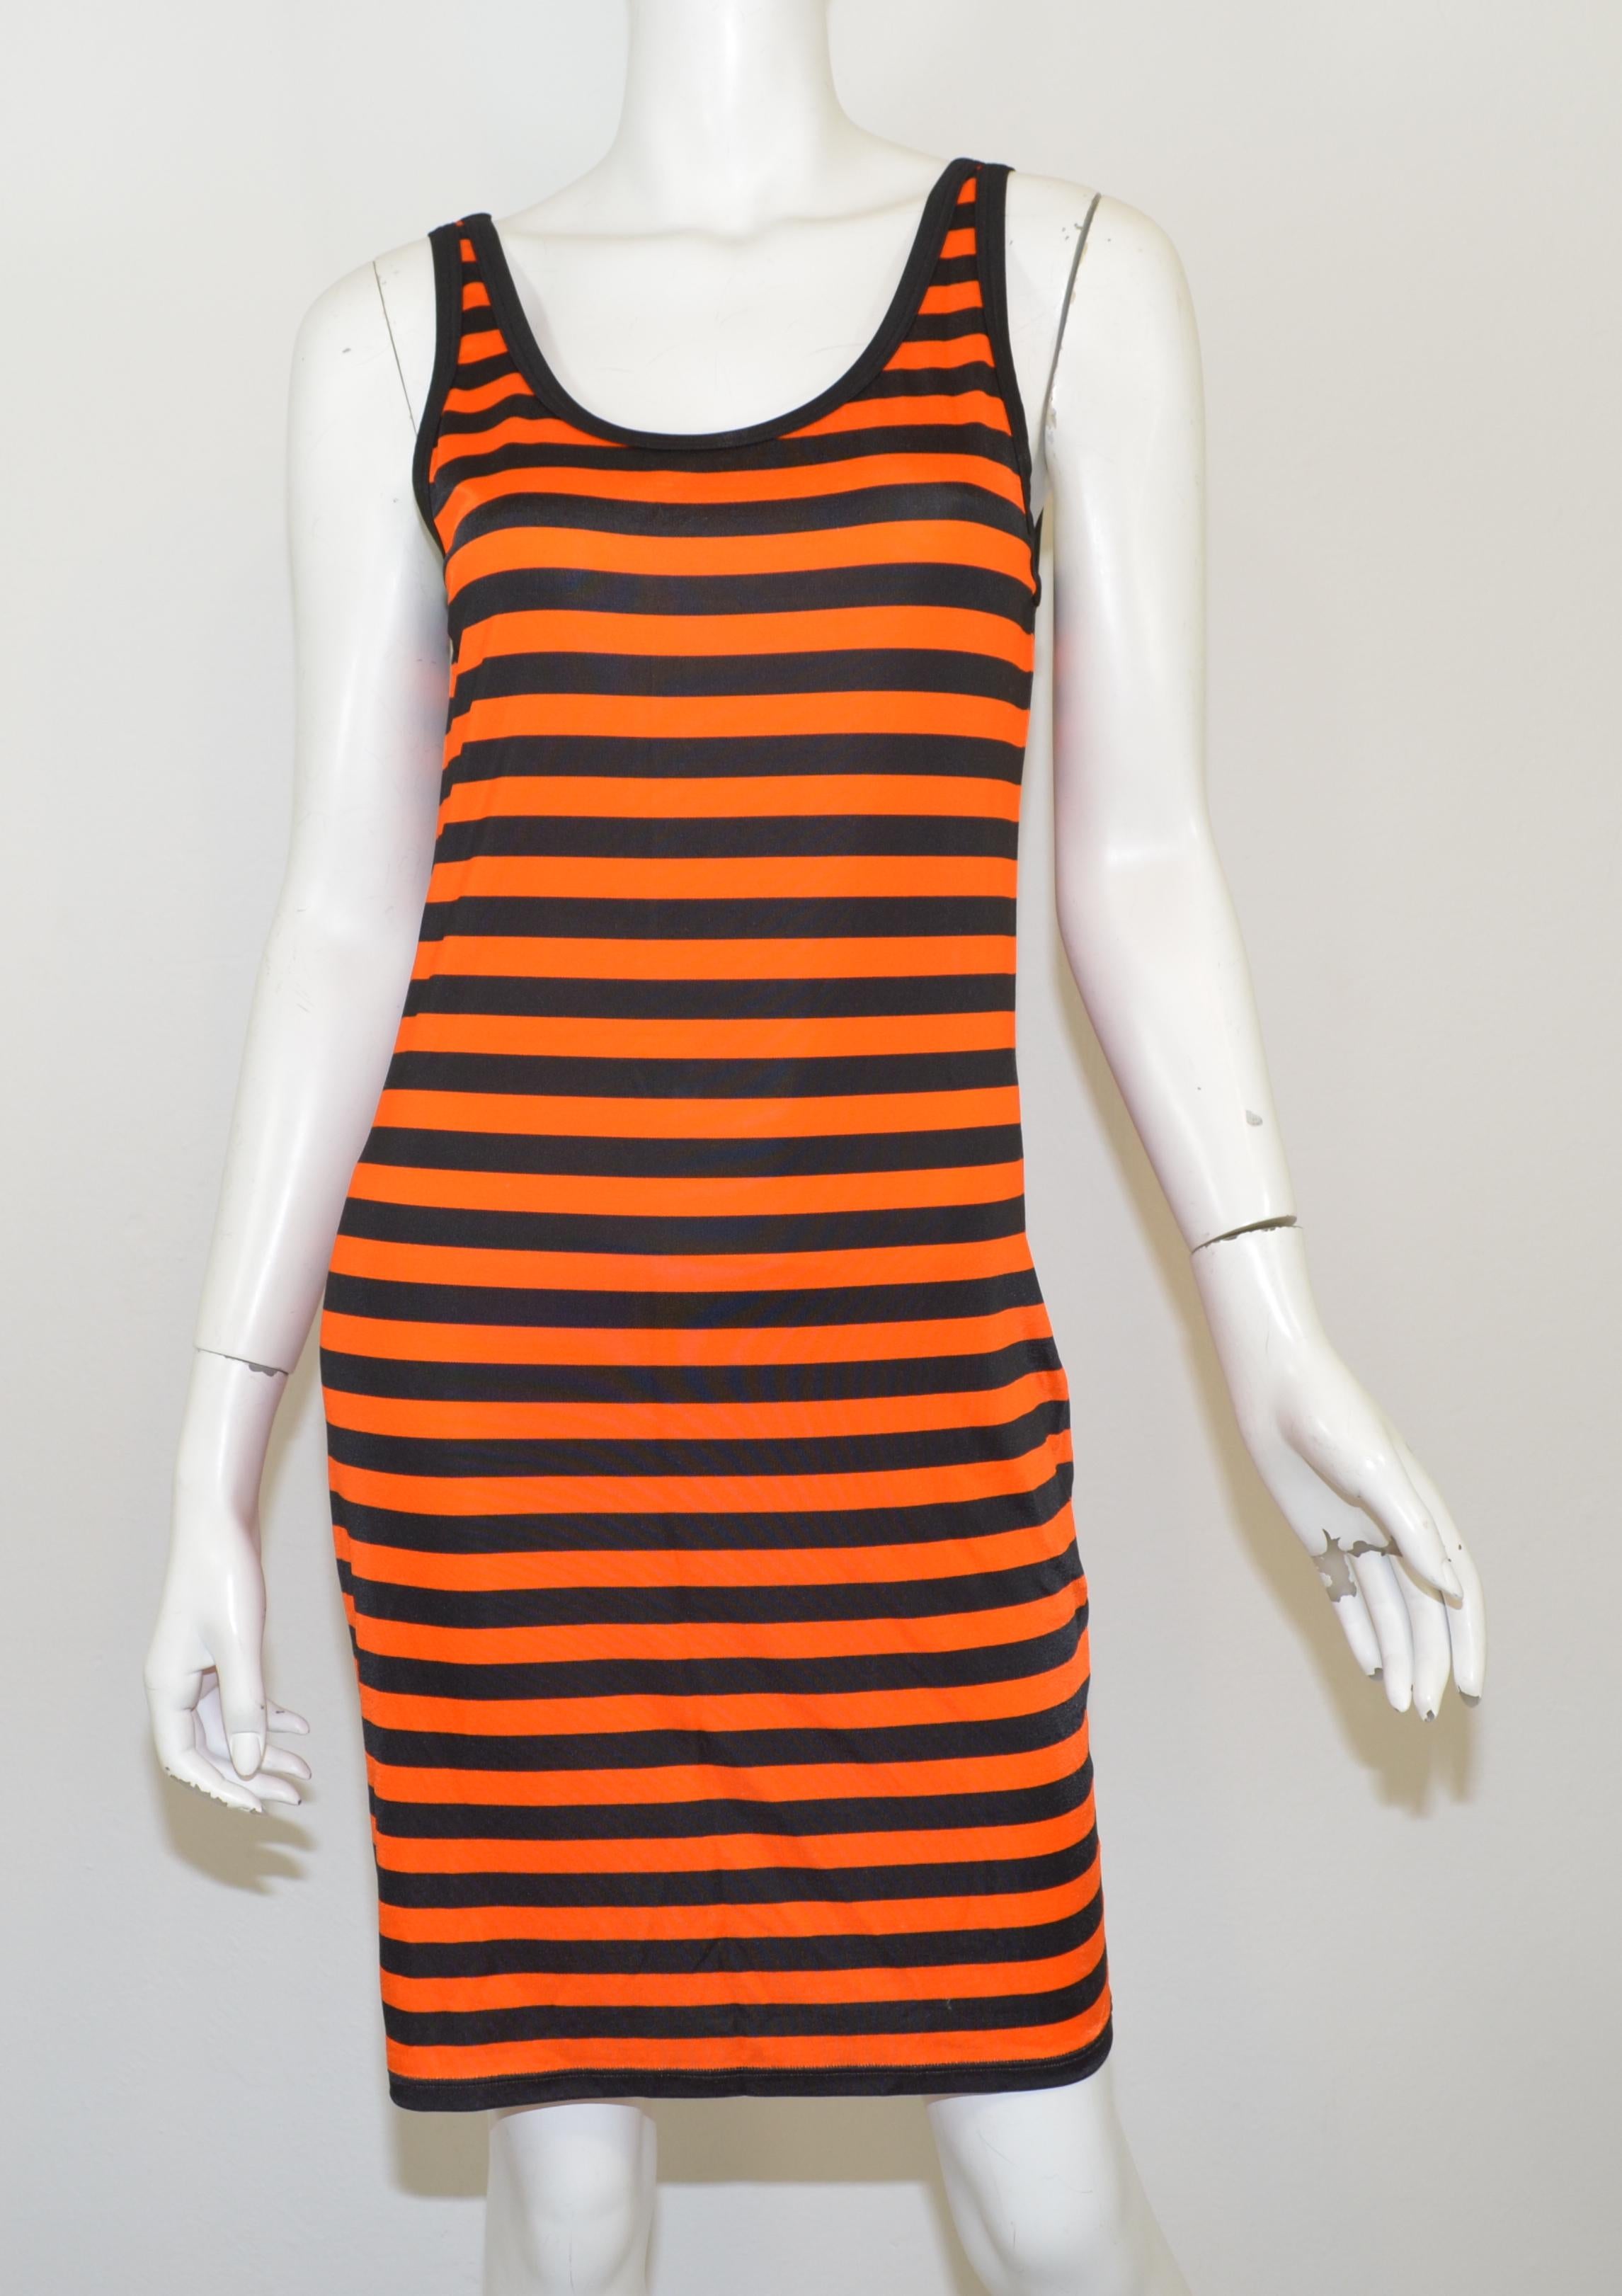 From the 2017 collection, this Clare Waight Keller for Givenchy striped dress is featured in orange and black and is composed with a silk spandex blend fabric. Dress is labeled size 42, made in Italy. 

Measurements: (Garment has stretch)
bust 34'',